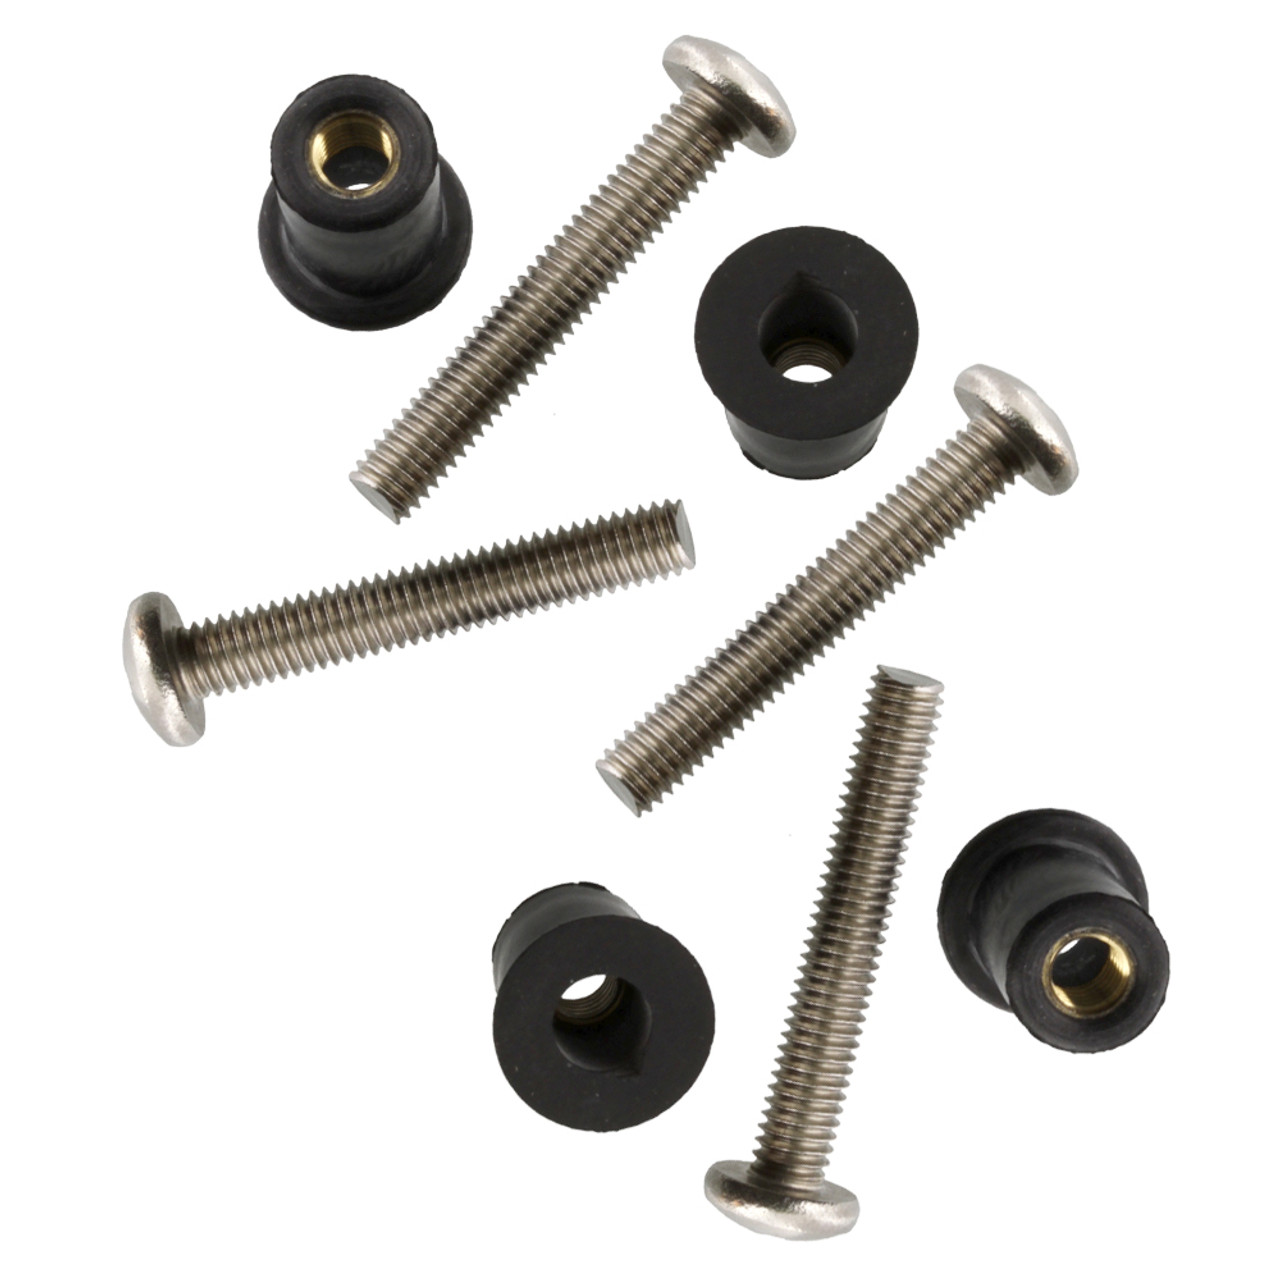 SCOTTY WELL NUT MOUNTING KIT 4PK S133-4